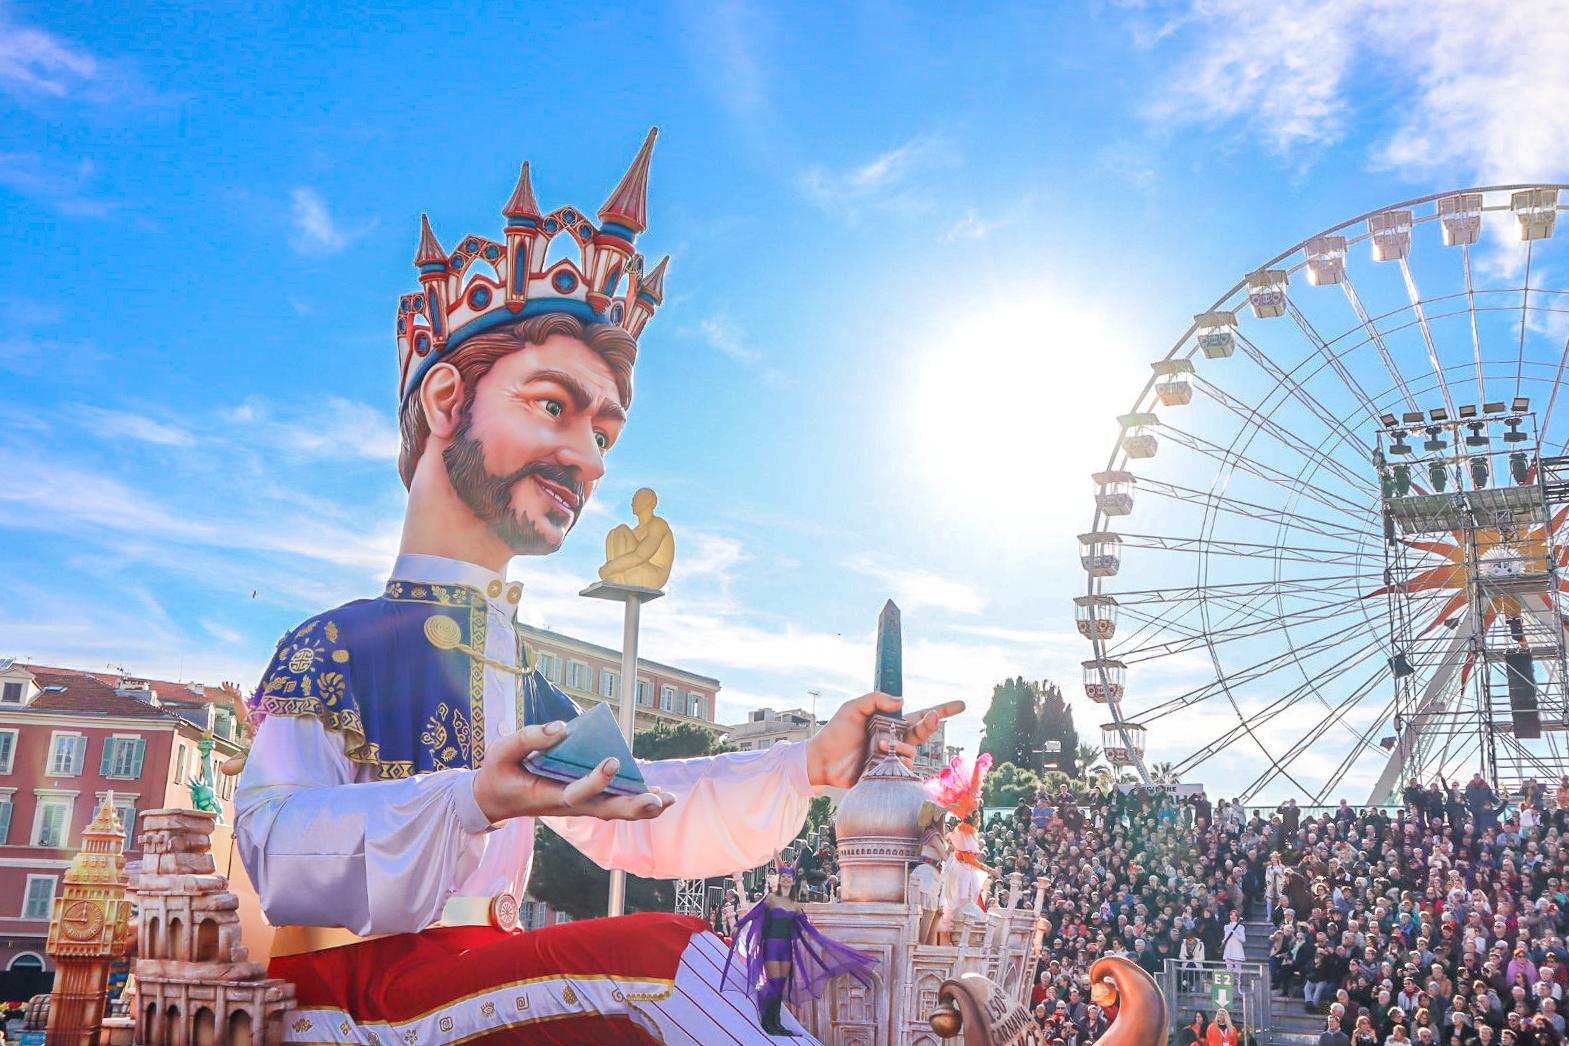 What does the Nice Carnival King symbolize?